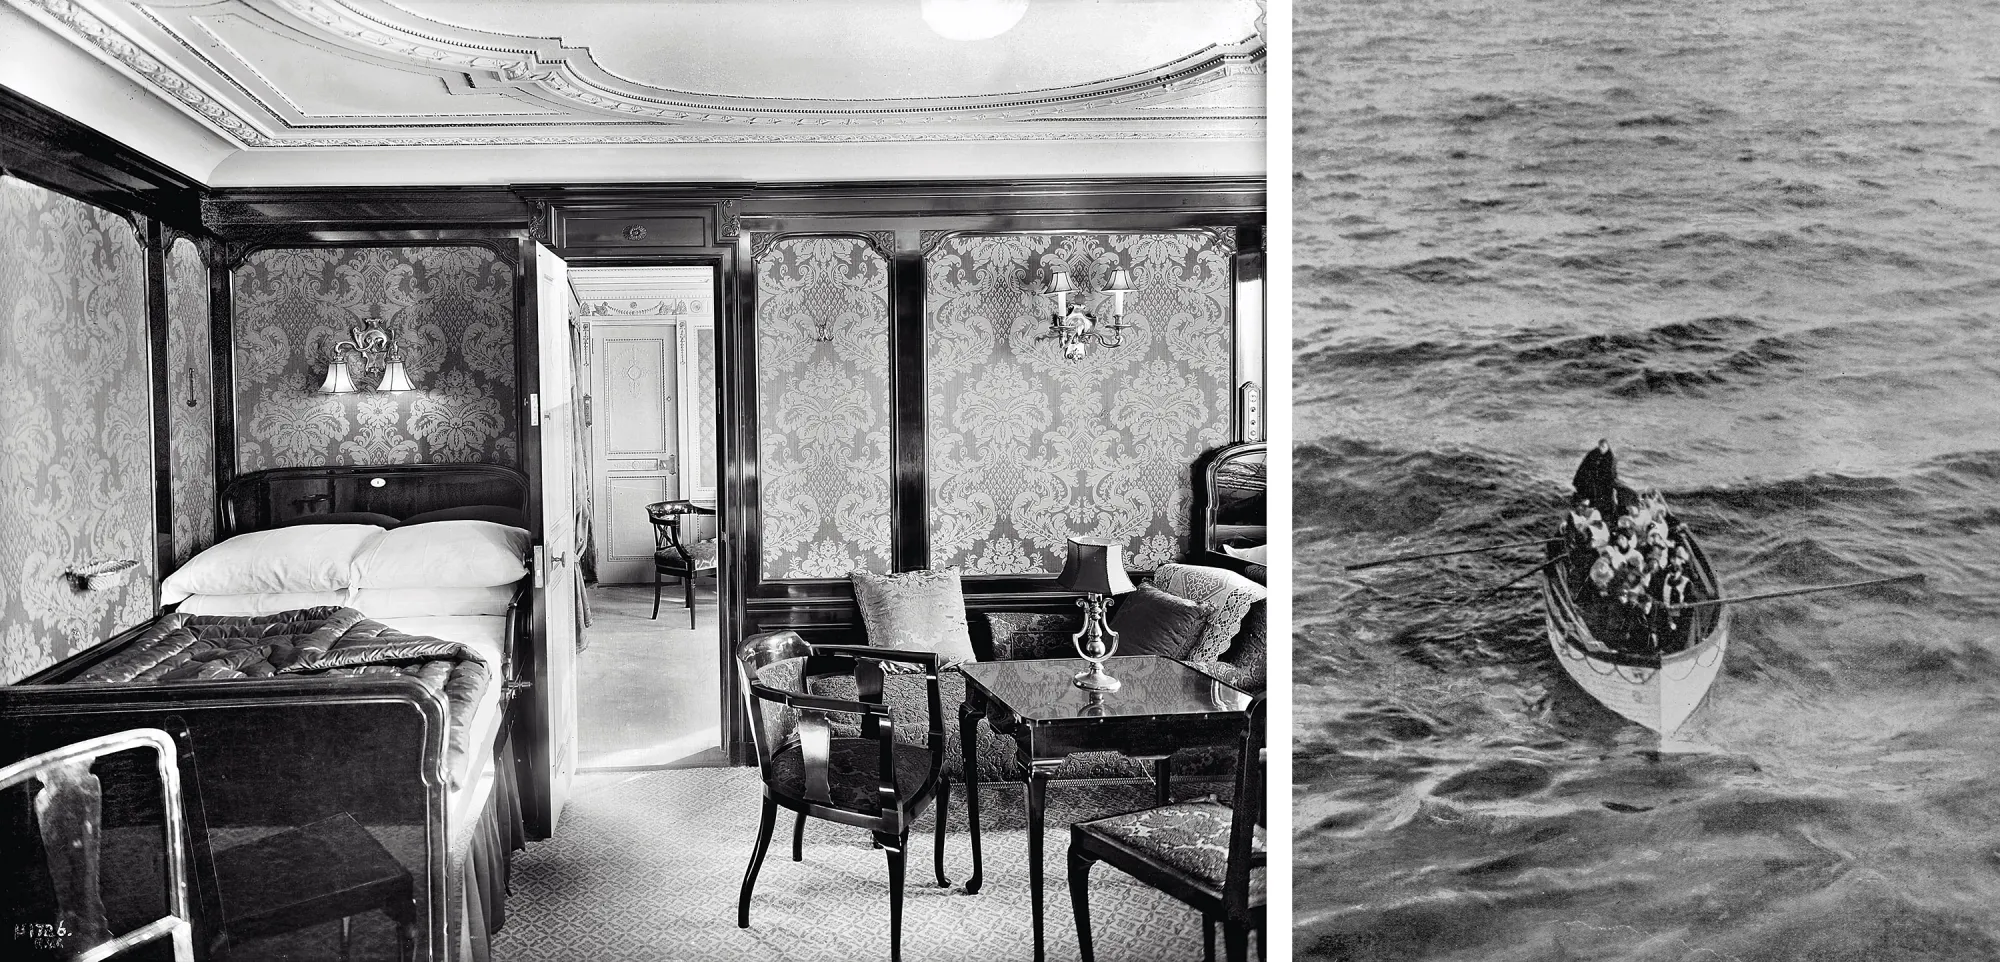 Left image shows a very decorated and luxurious room with a bed, table and chairs, the photo on the left shows survivors rowing in a lifeboat.